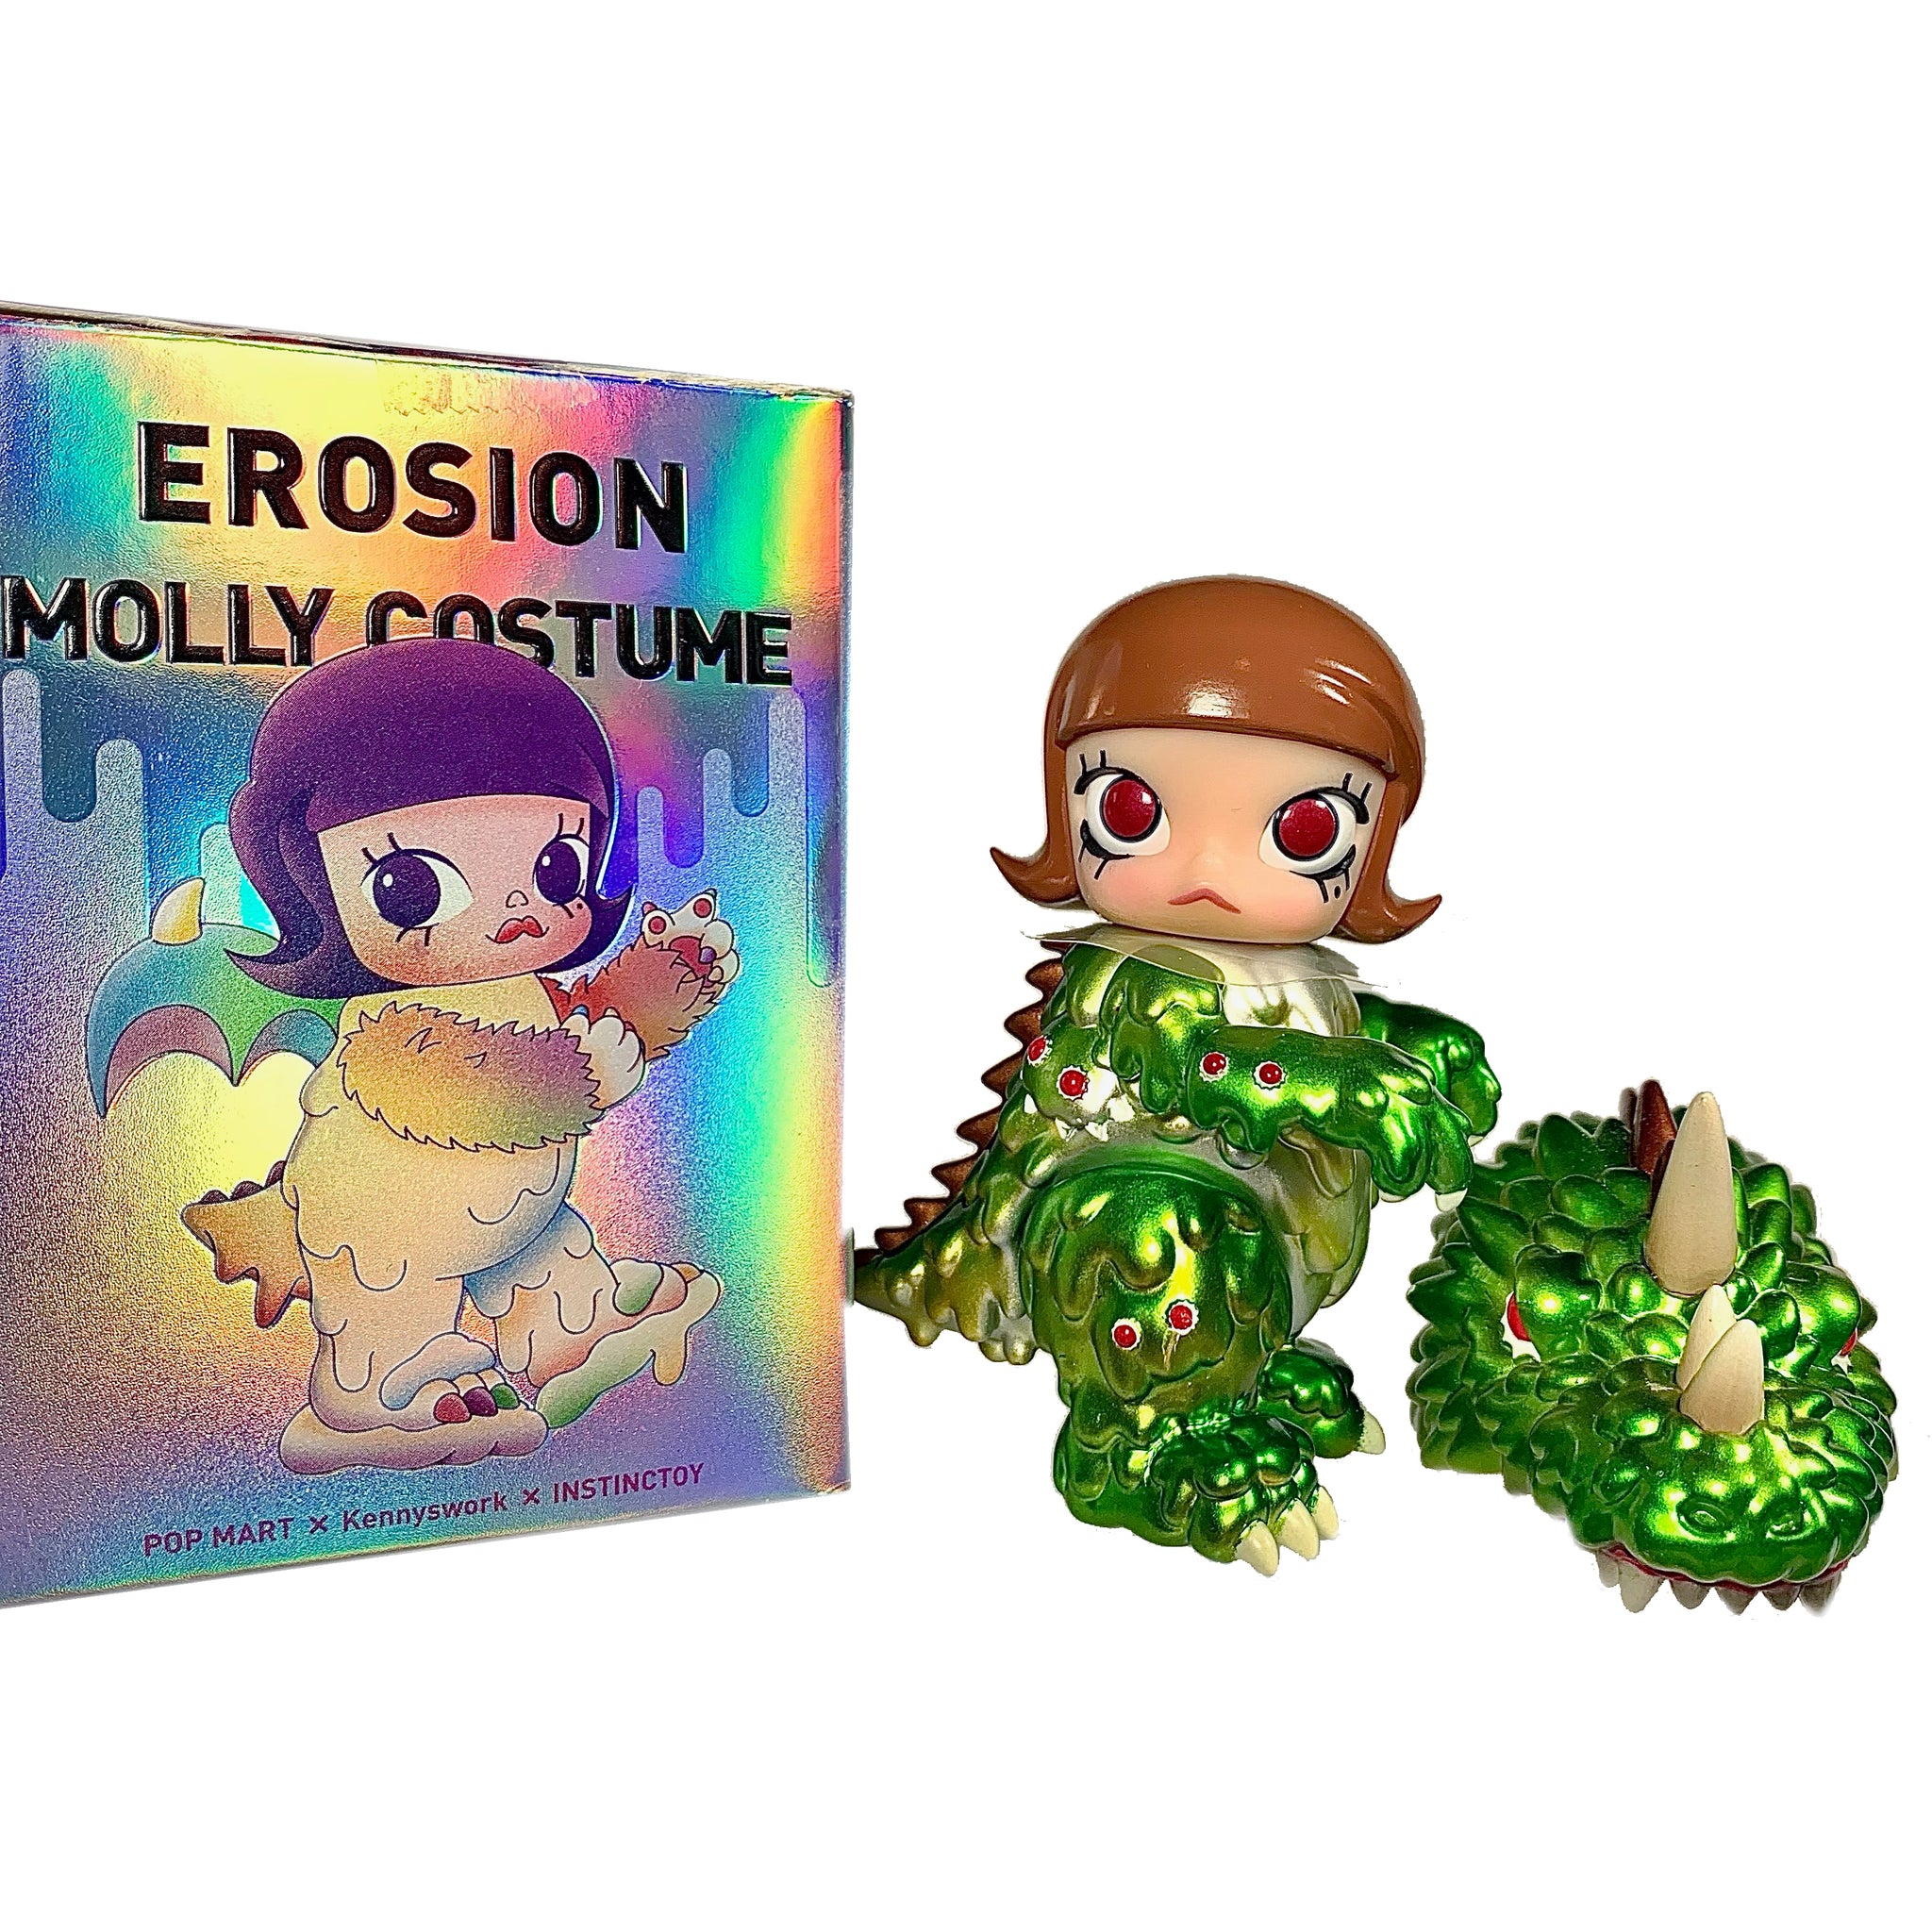 Erosion Molly Costume Series, VINCENT MOLLY, 4